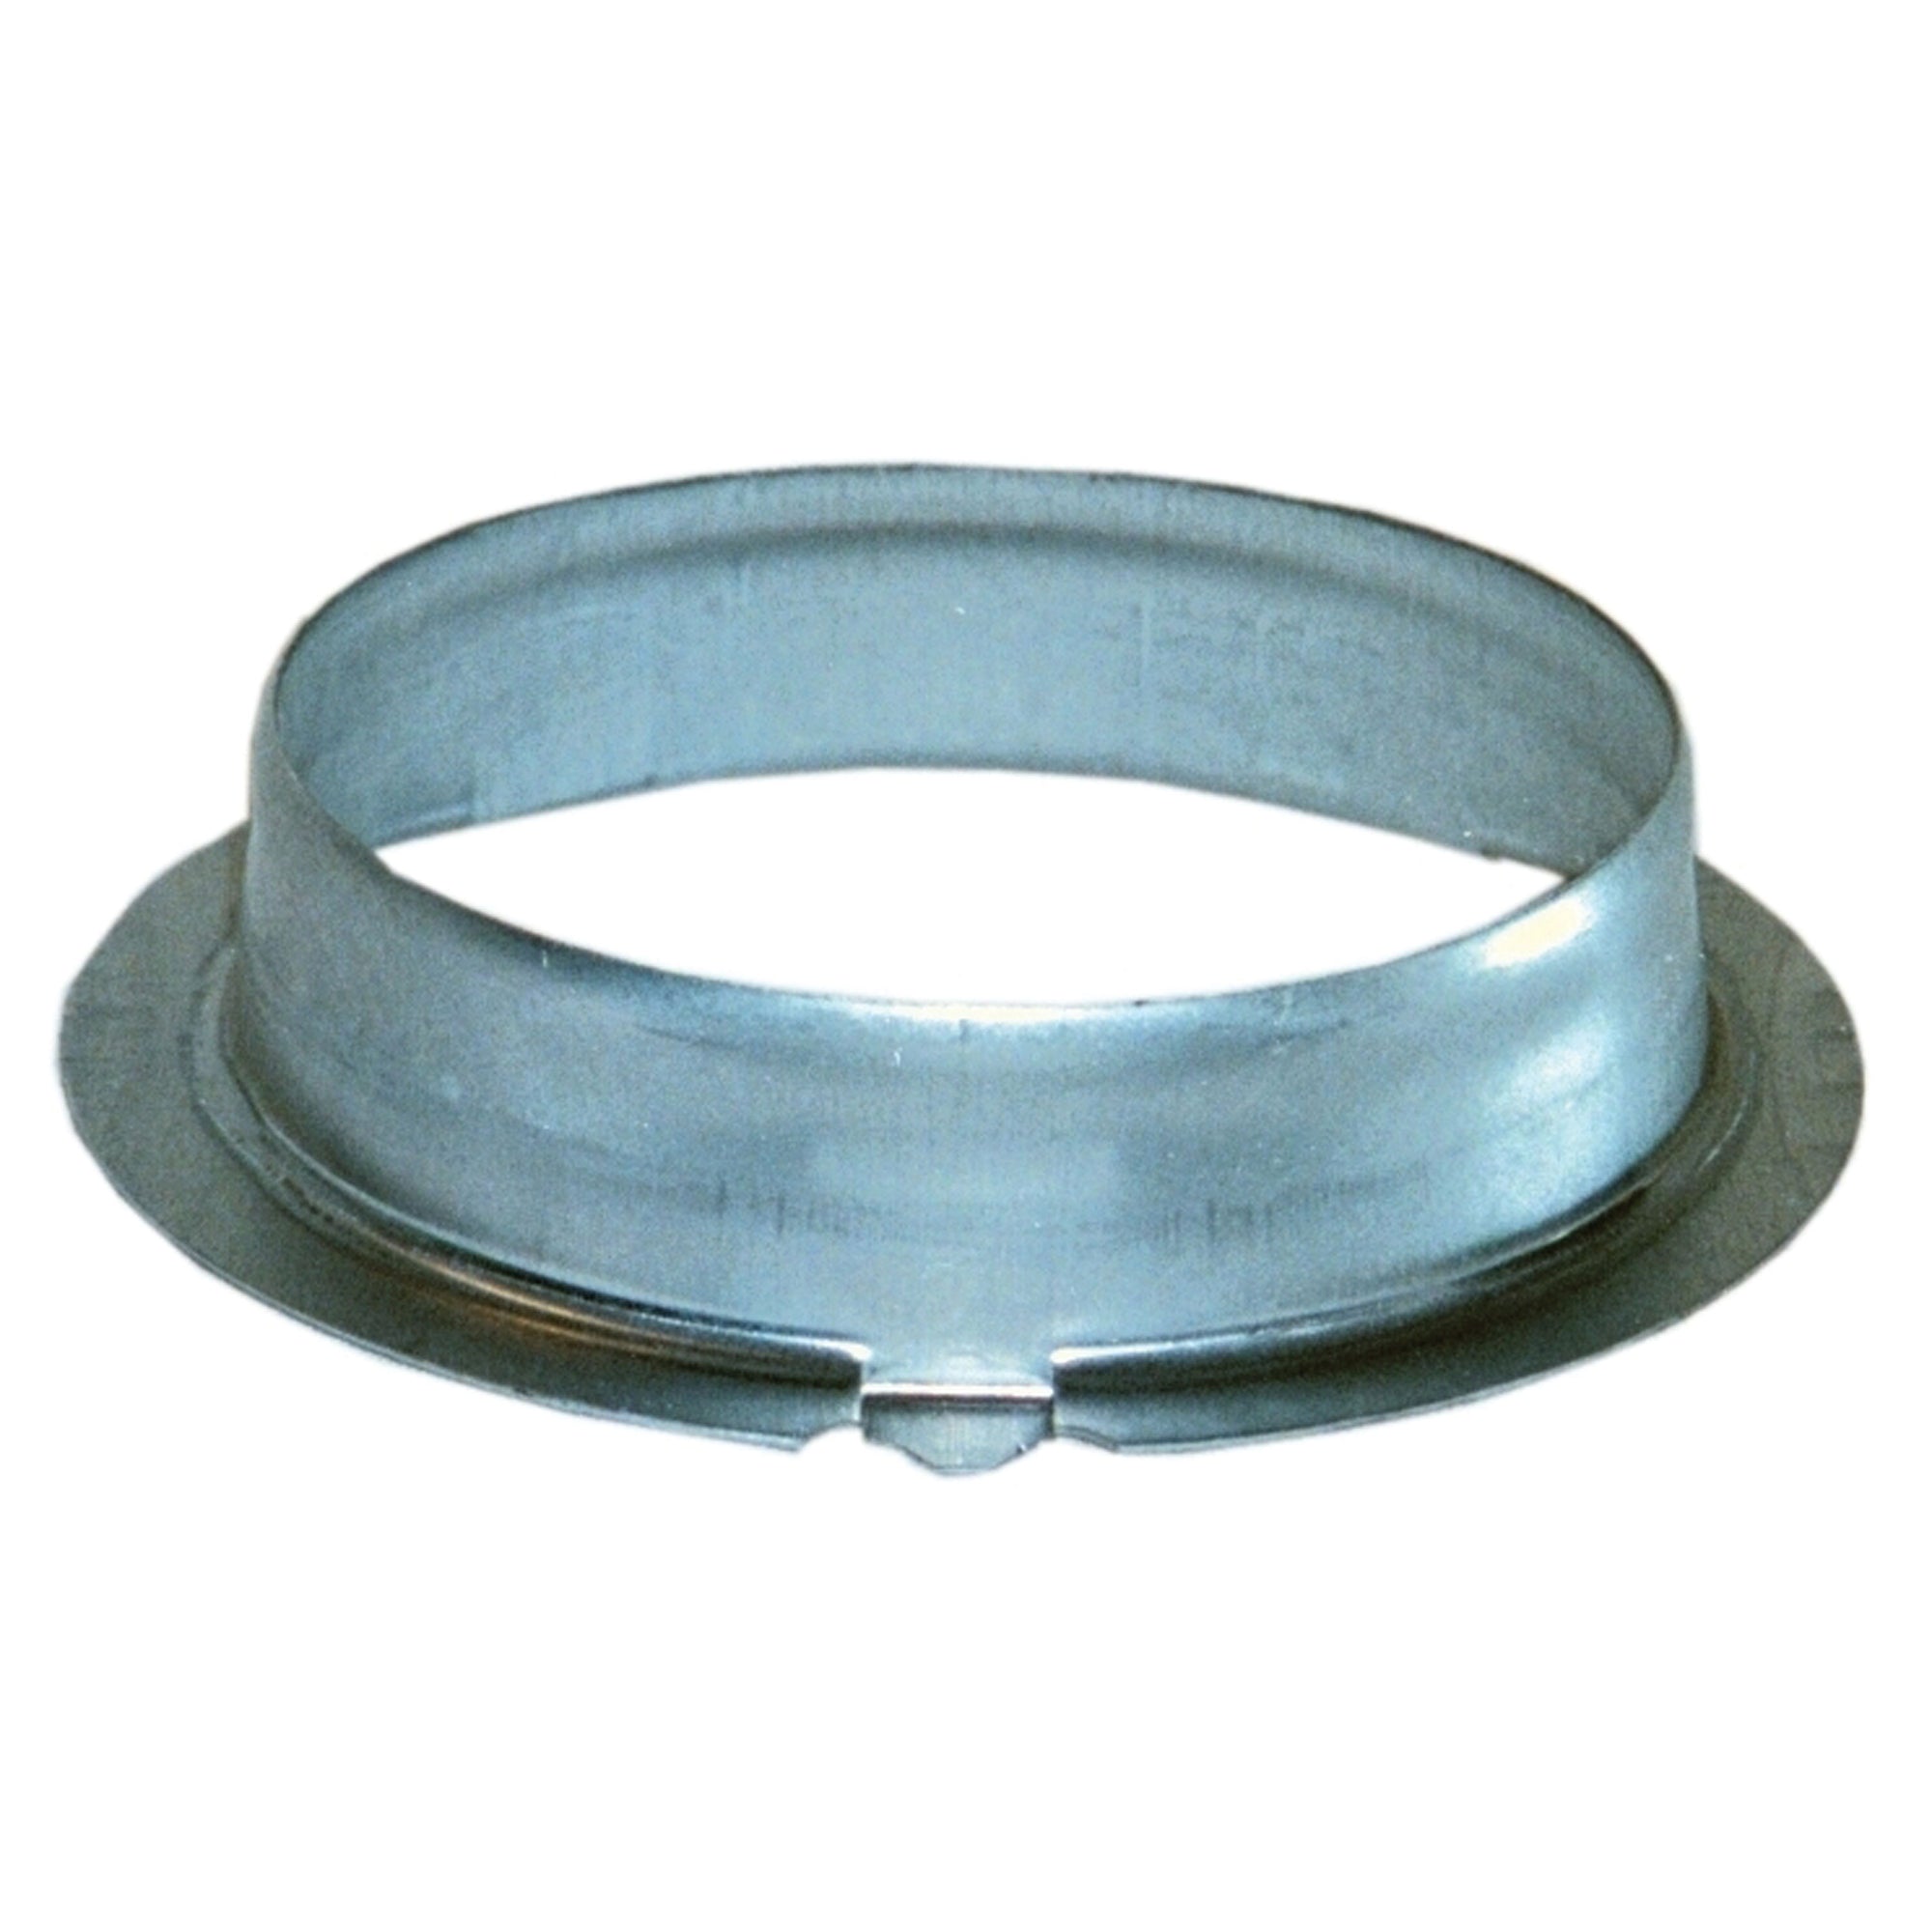 Suburban 051240 Furnace Duct Collar for P40 Models